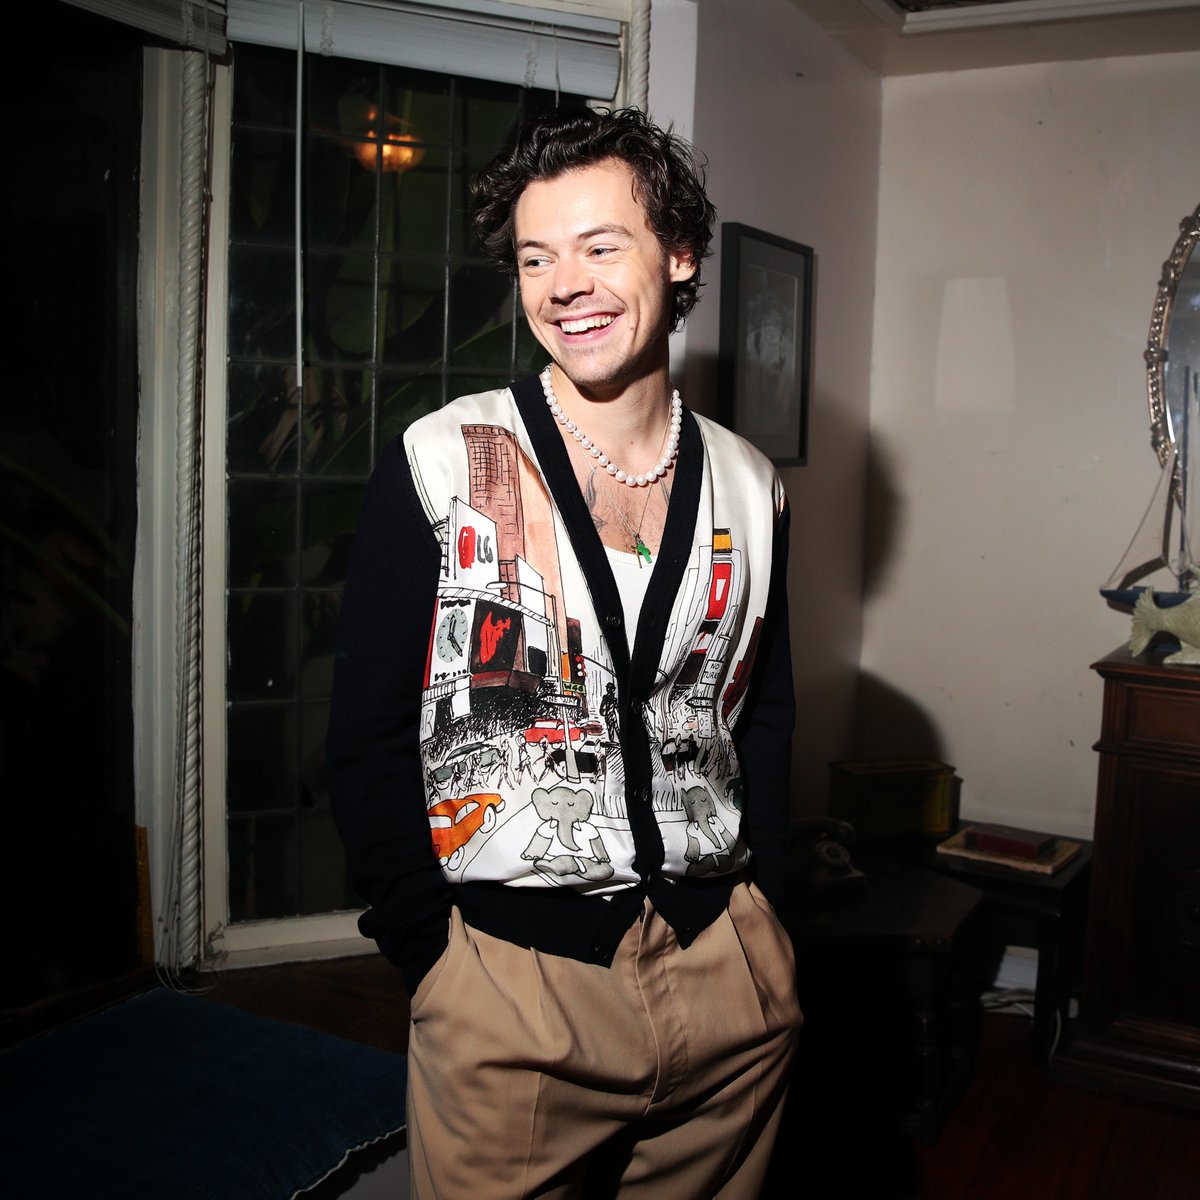 Harry Styles can do classic just as well as showman, seen clearly here in this Lanvin cardigan, muted slacks, and Old Skool vans with his signature pearl necklace, duh!